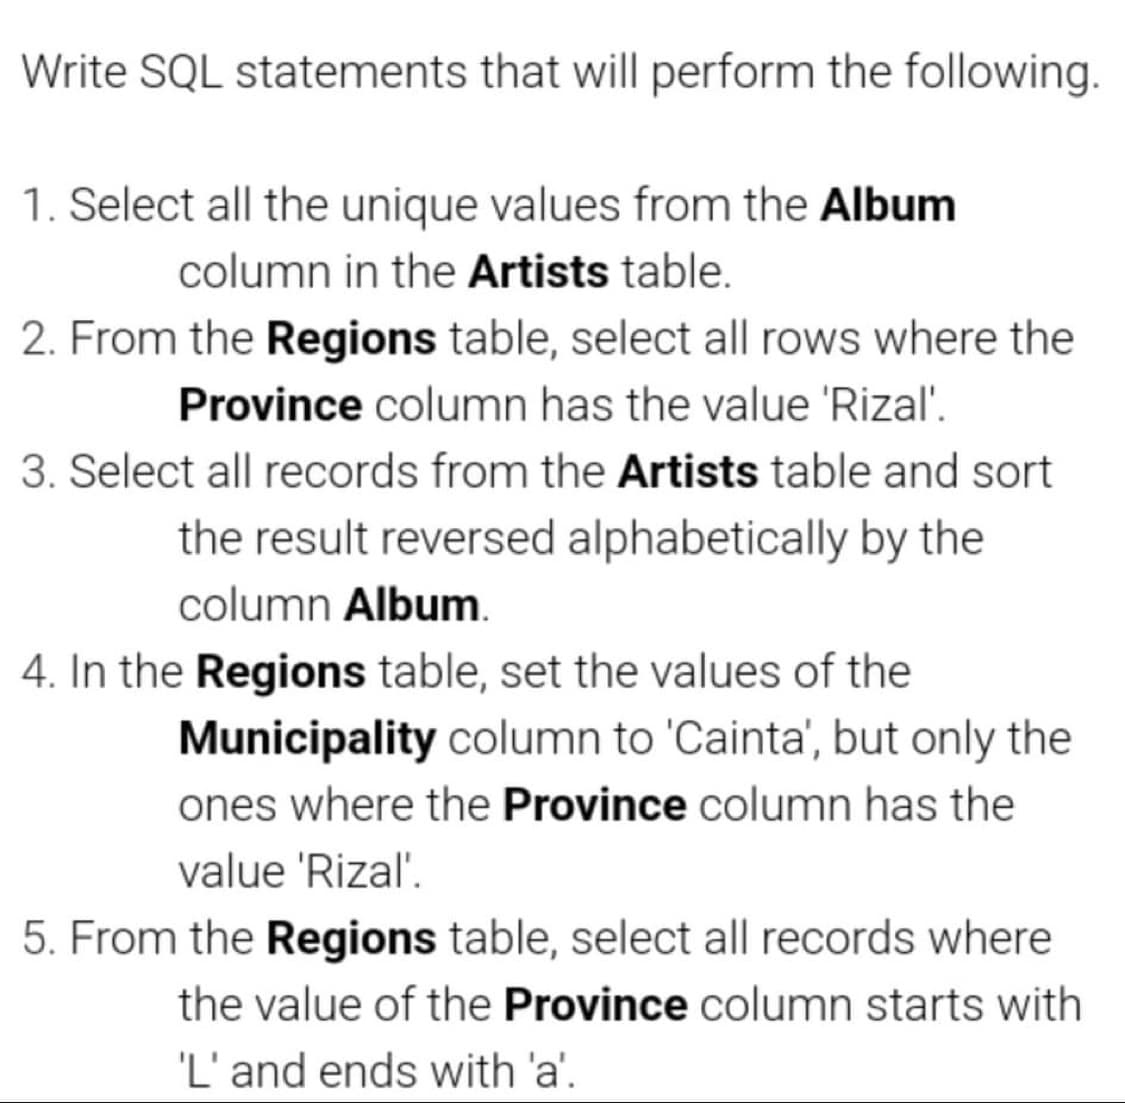 Write SQL statements that will perform the following.
1. Select all the unique values from the Album
column in the Artists table.
2. From the Regions table, select all rows where the
Province column has the value 'Rizal'.
3. Select all records from the Artists table and sort
the result reversed alphabetically by the
column Album.
4. In the Regions table, set the values of the
Municipality column to 'Cainta', but only the
ones where the Province column has the
value 'Rizal'.
5. From the Regions table, select all records where
the value of the Province column starts with
'L' and ends with 'a'.